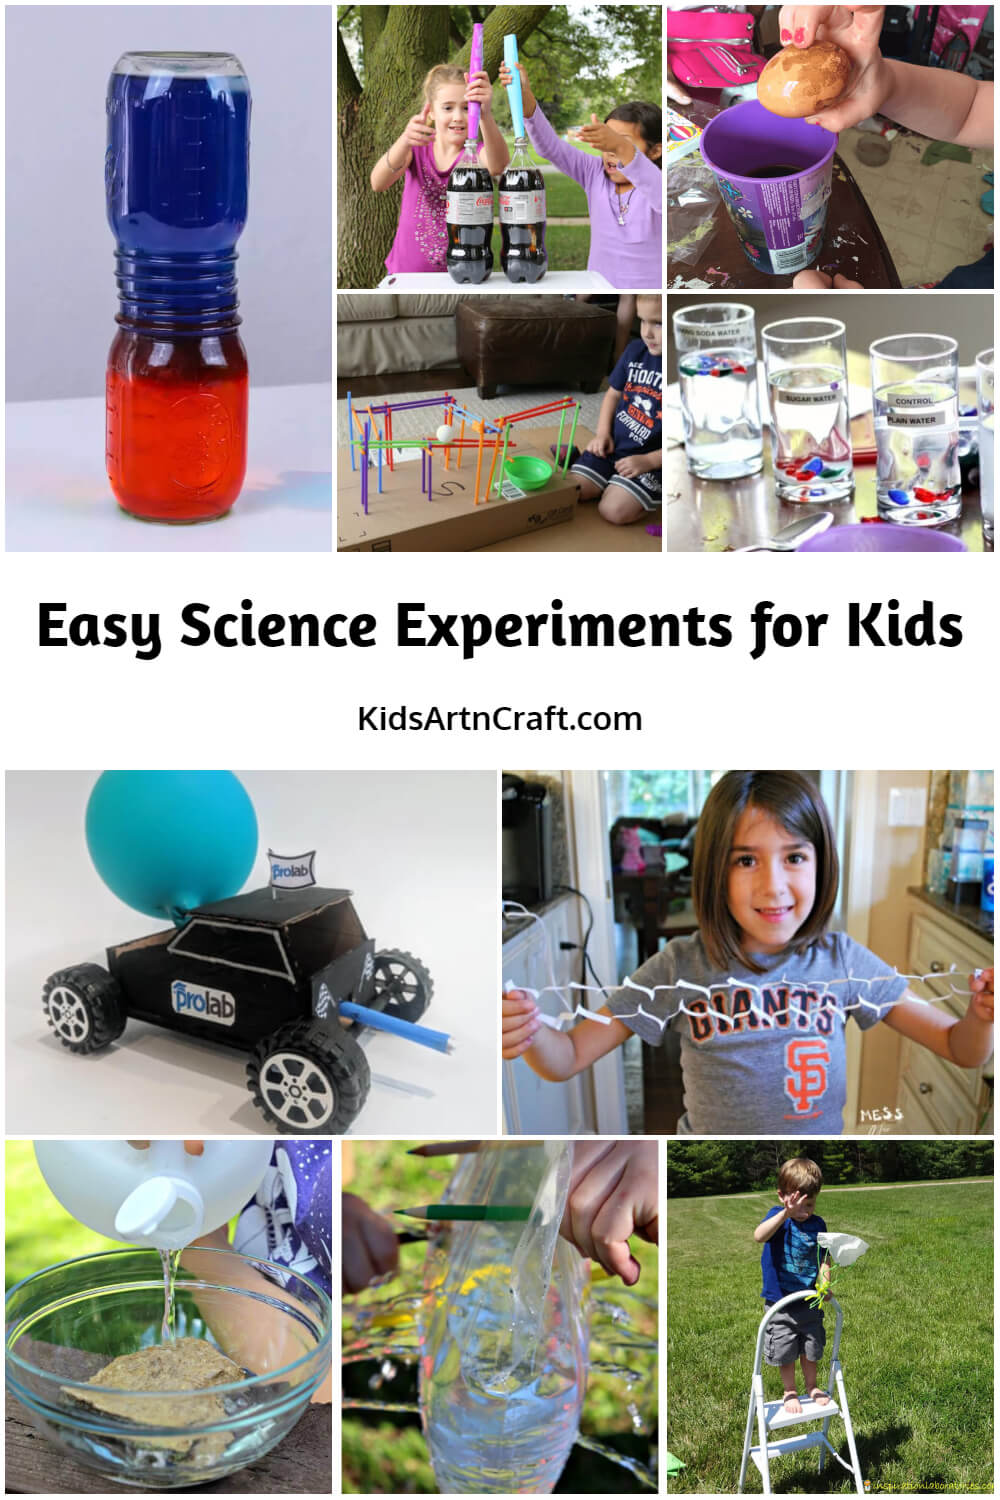 Easy Science Experiments for Kids To Do At Home - Kids Art & Craft